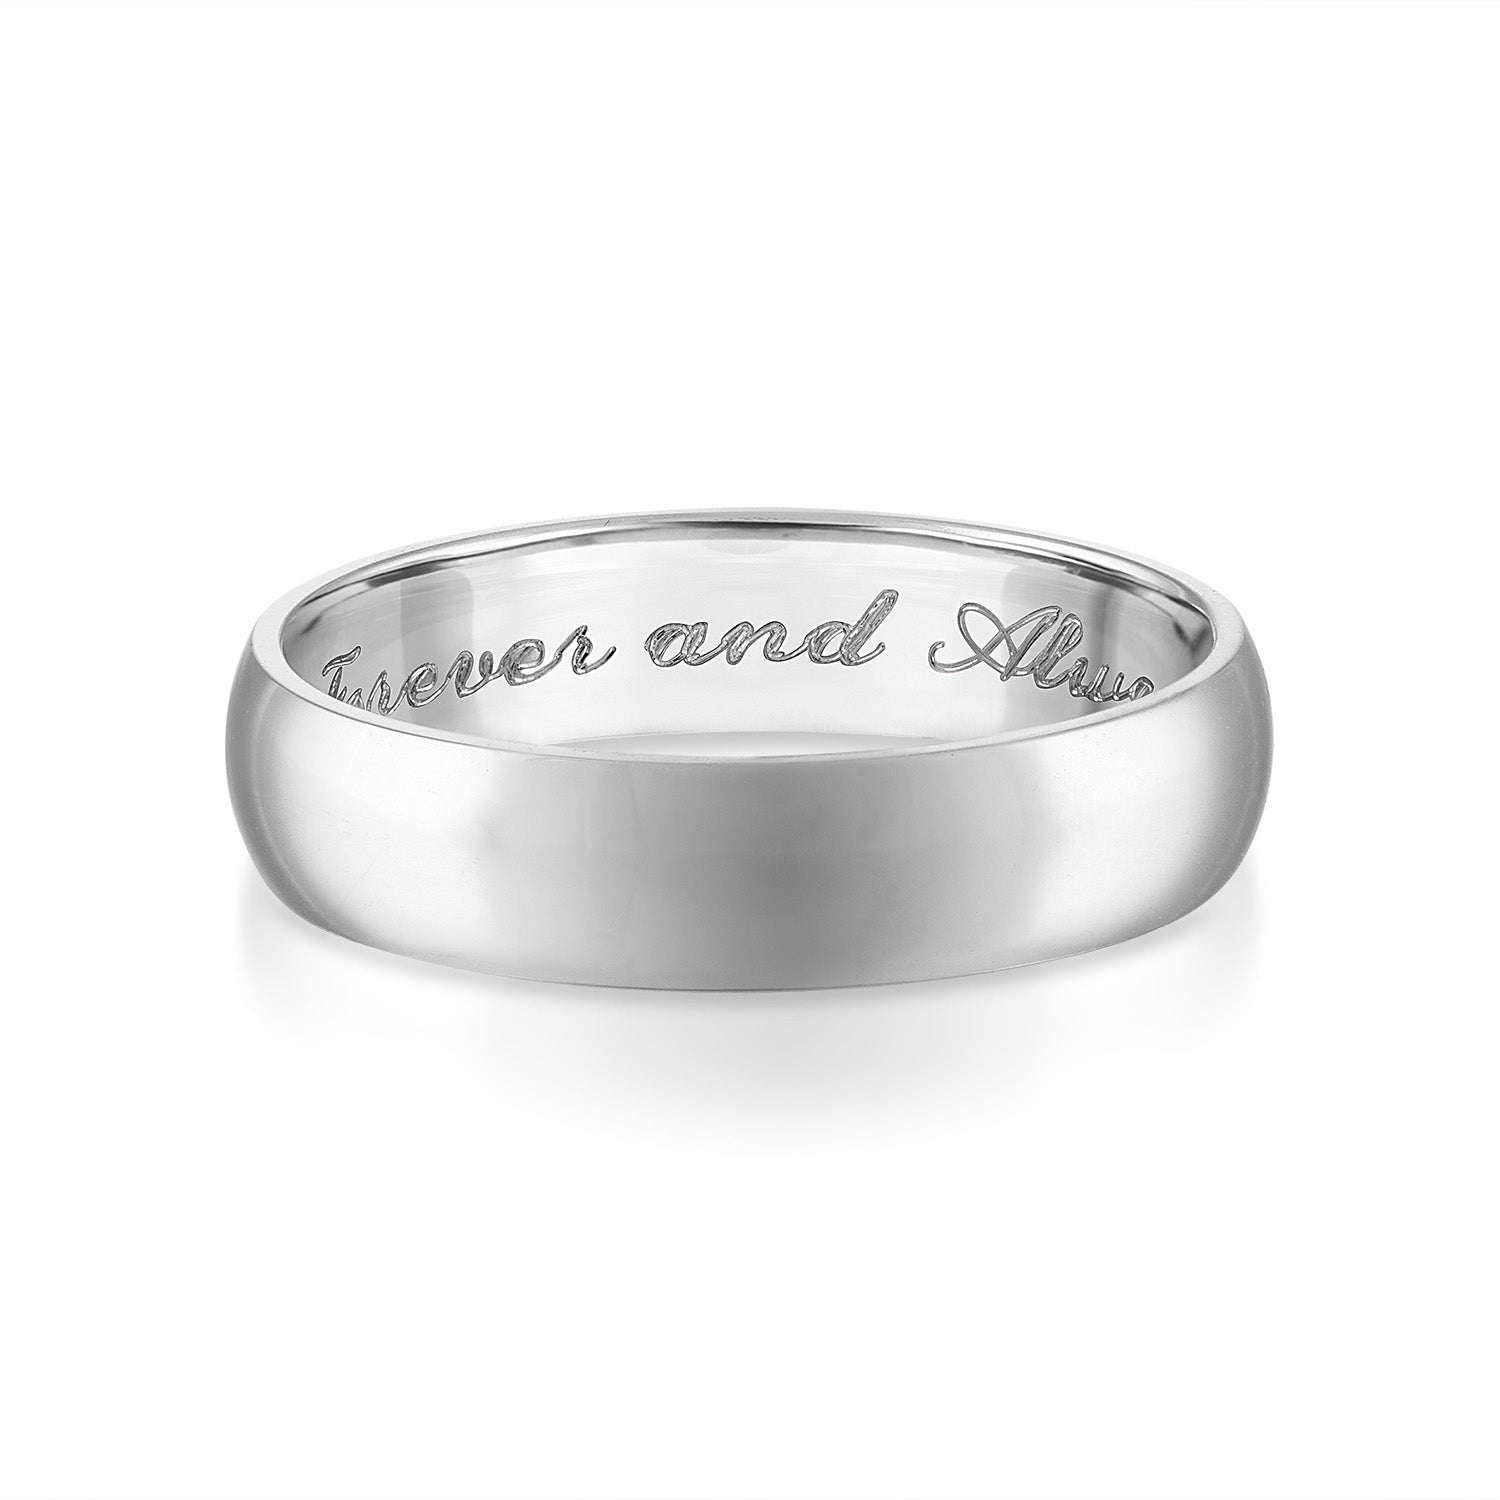 Engraving for Wedding Bands